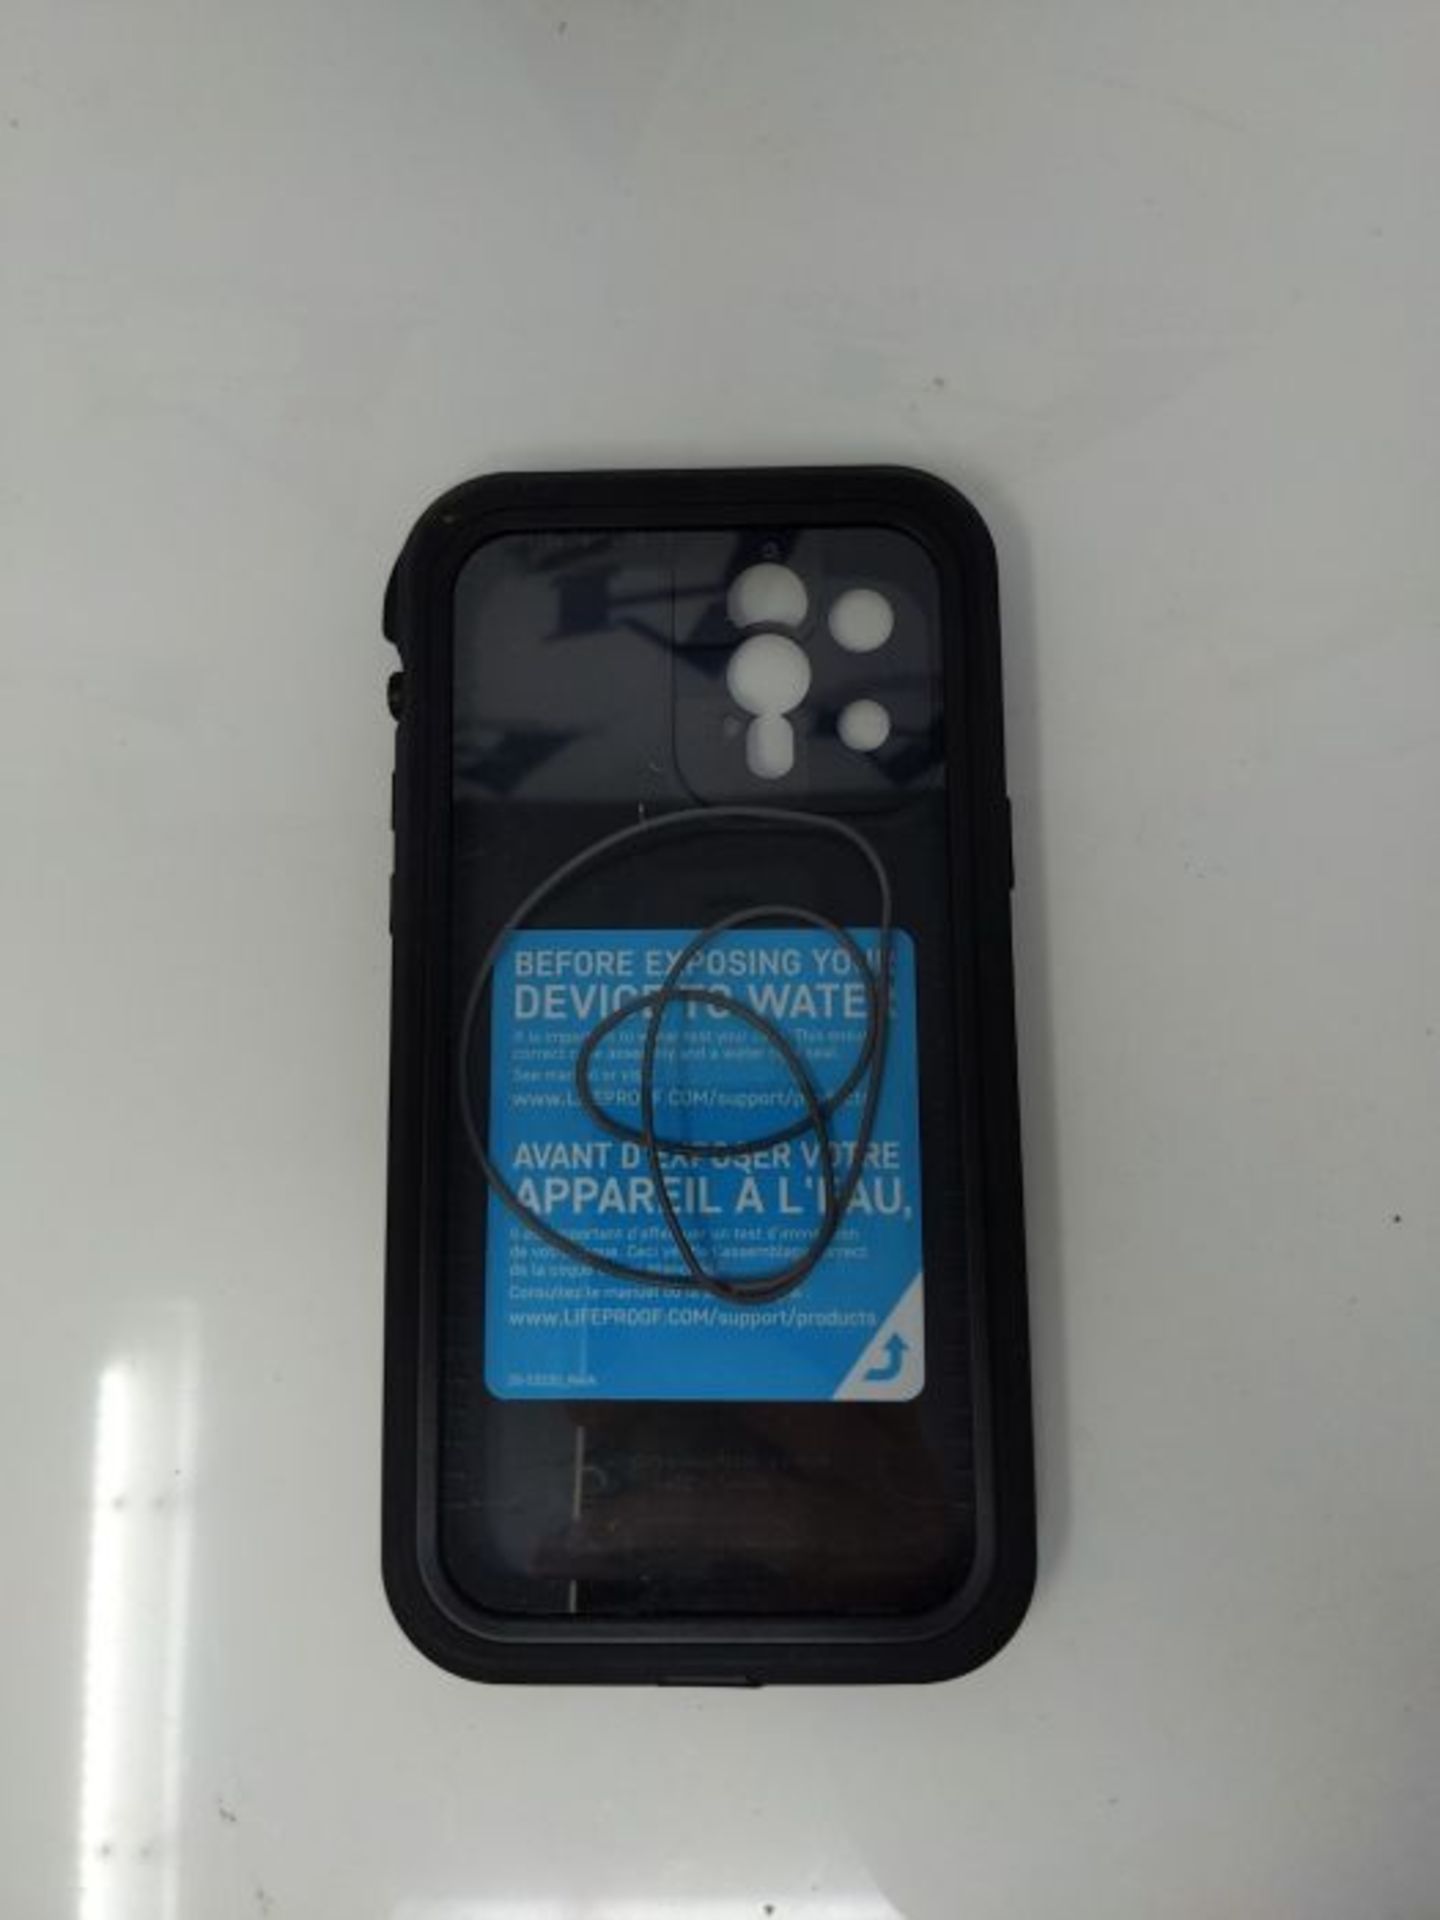 LifeProof for iPhone 12 Pro, Waterproof Drop Protective Case, Fre Series, Black - Image 9 of 9